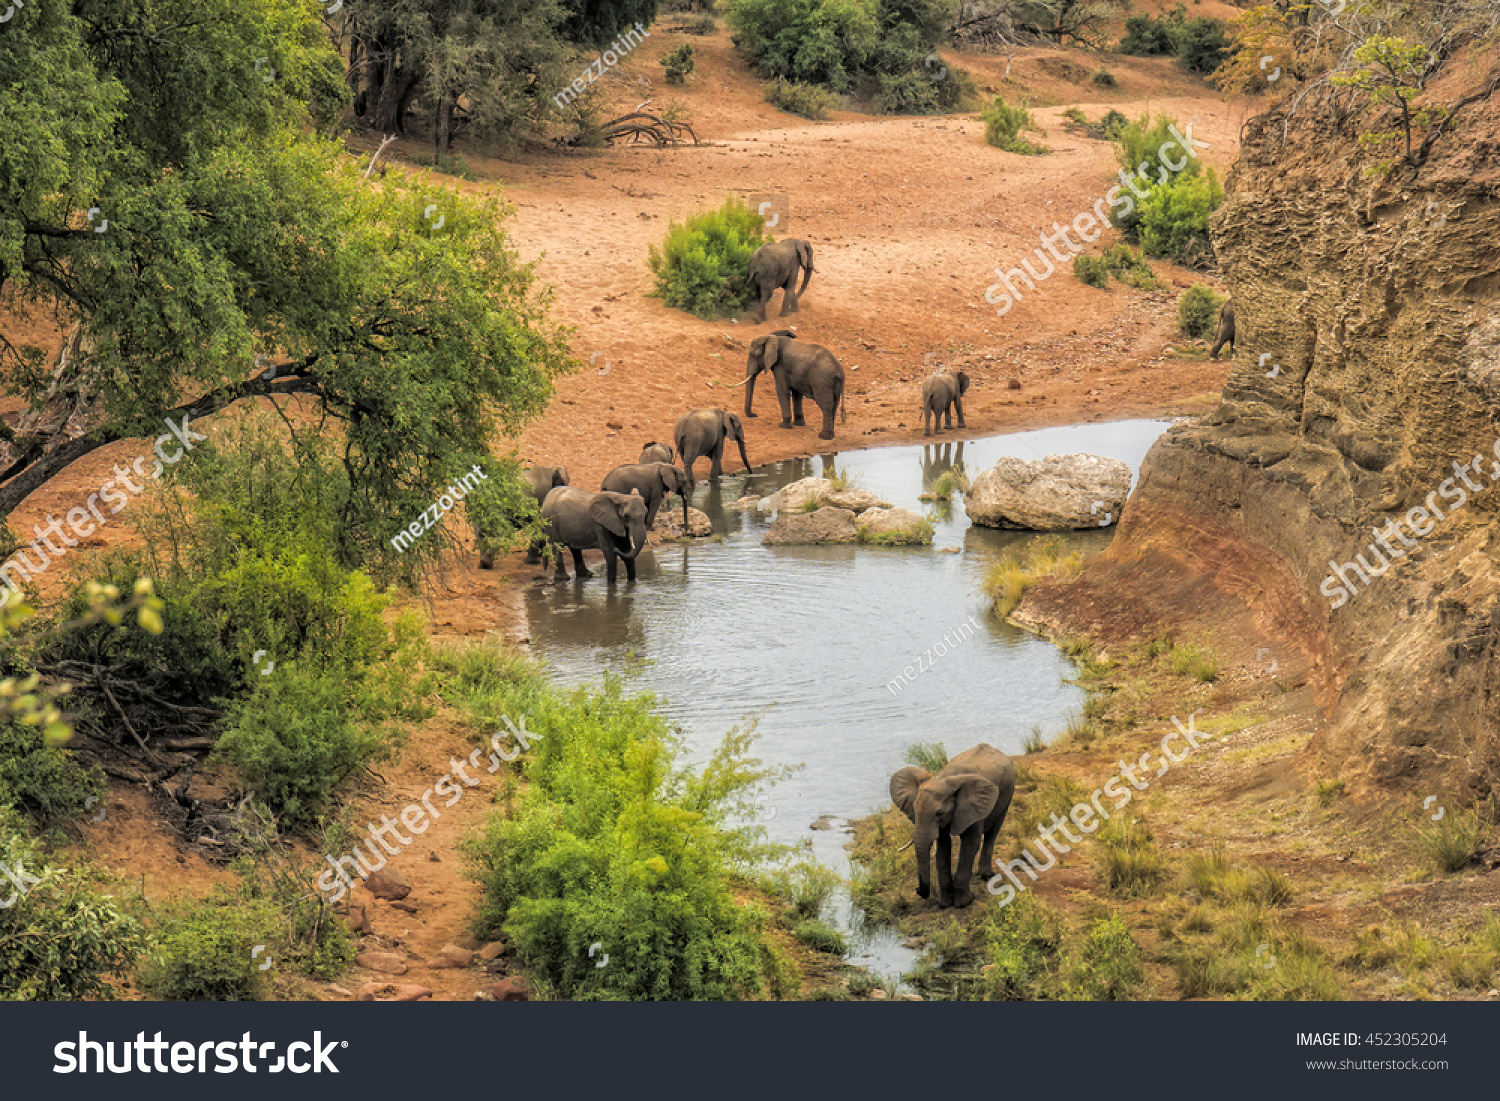 Elephants drinking water at the viewpoint Red Rock in the Kruger national park #452305204